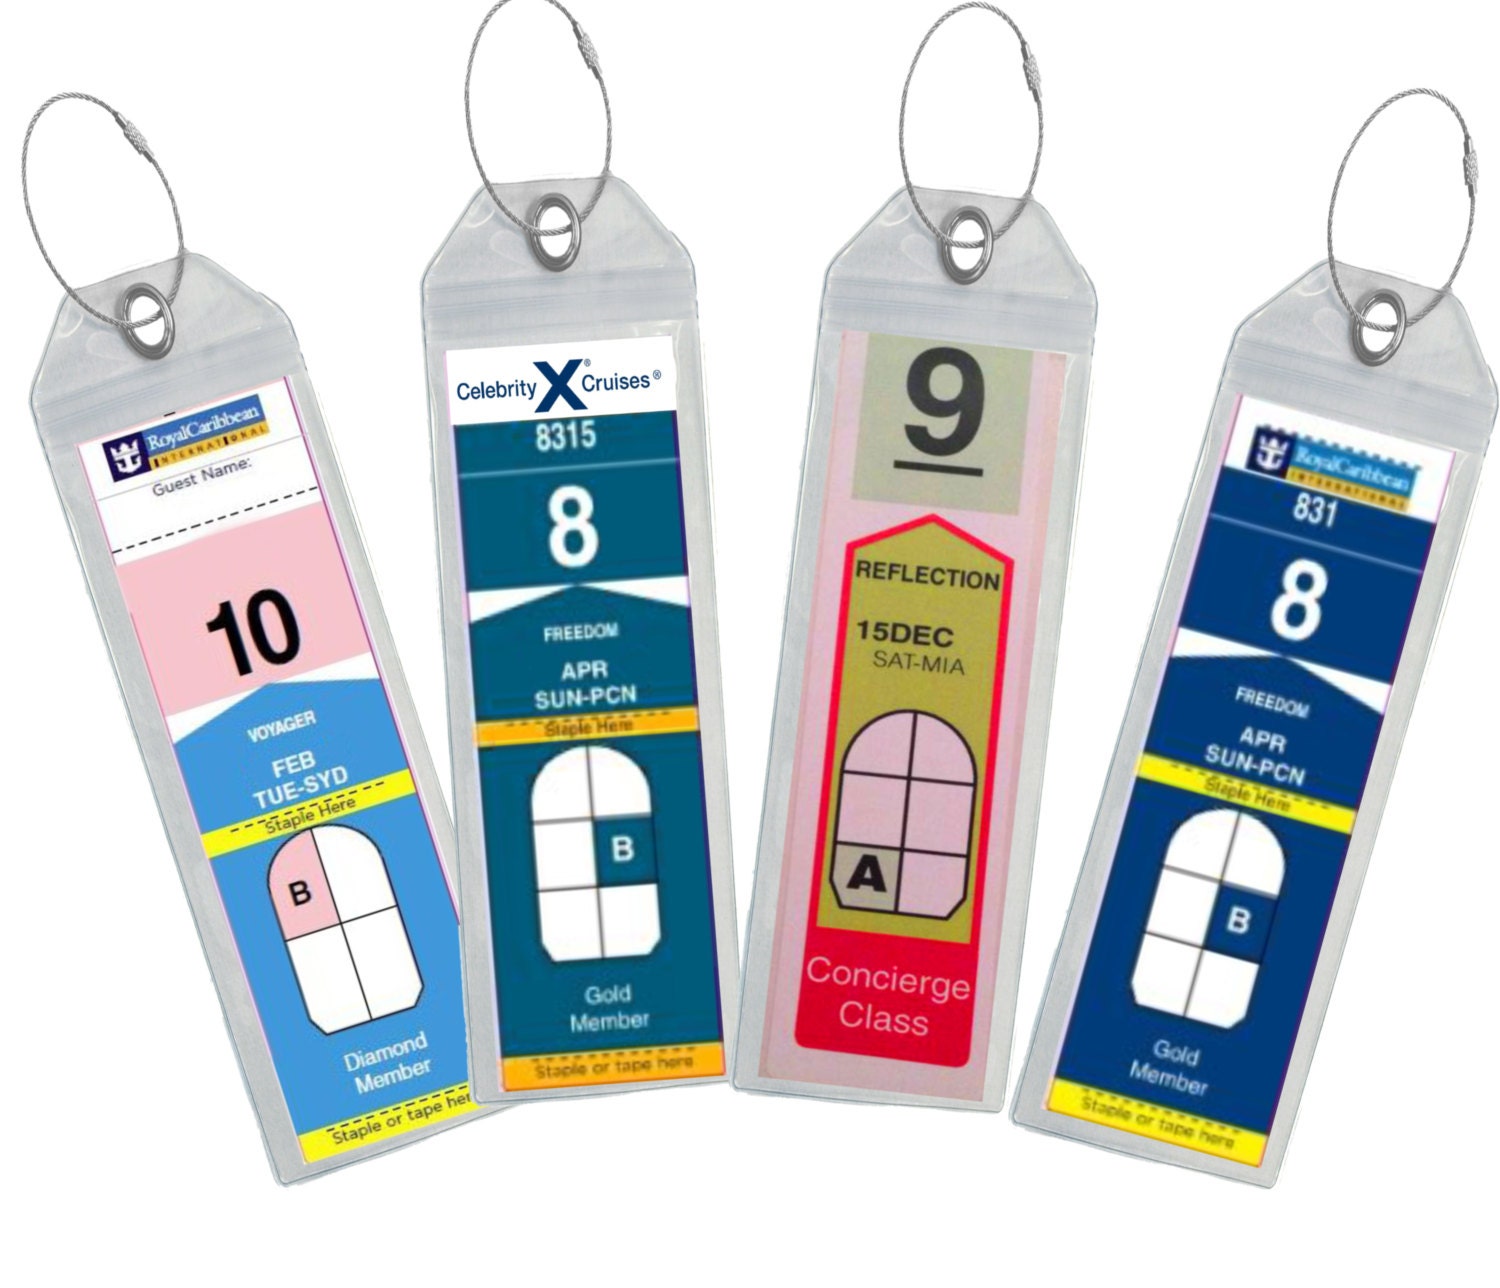 cruise luggage tags holders